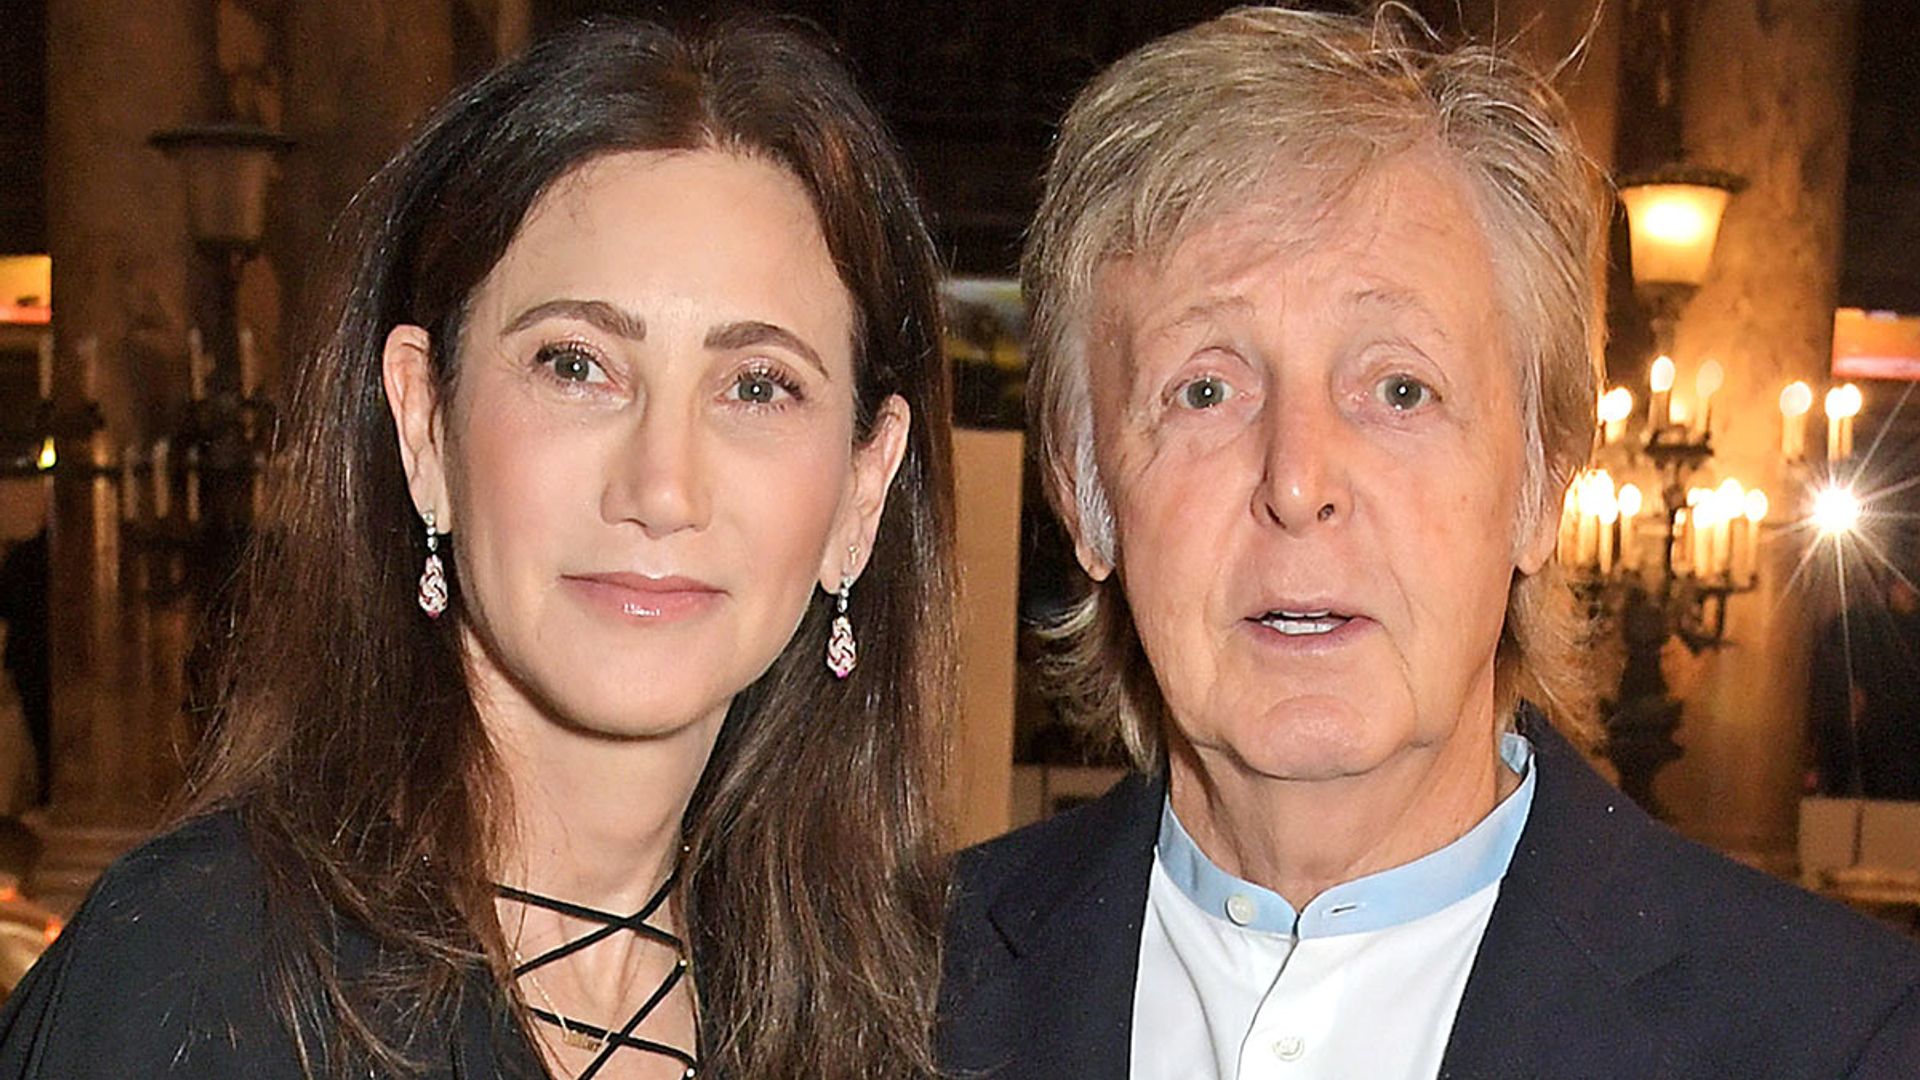 Paul Mccartneys Youthful New Photo With Wife Nancy Shevell Sparks